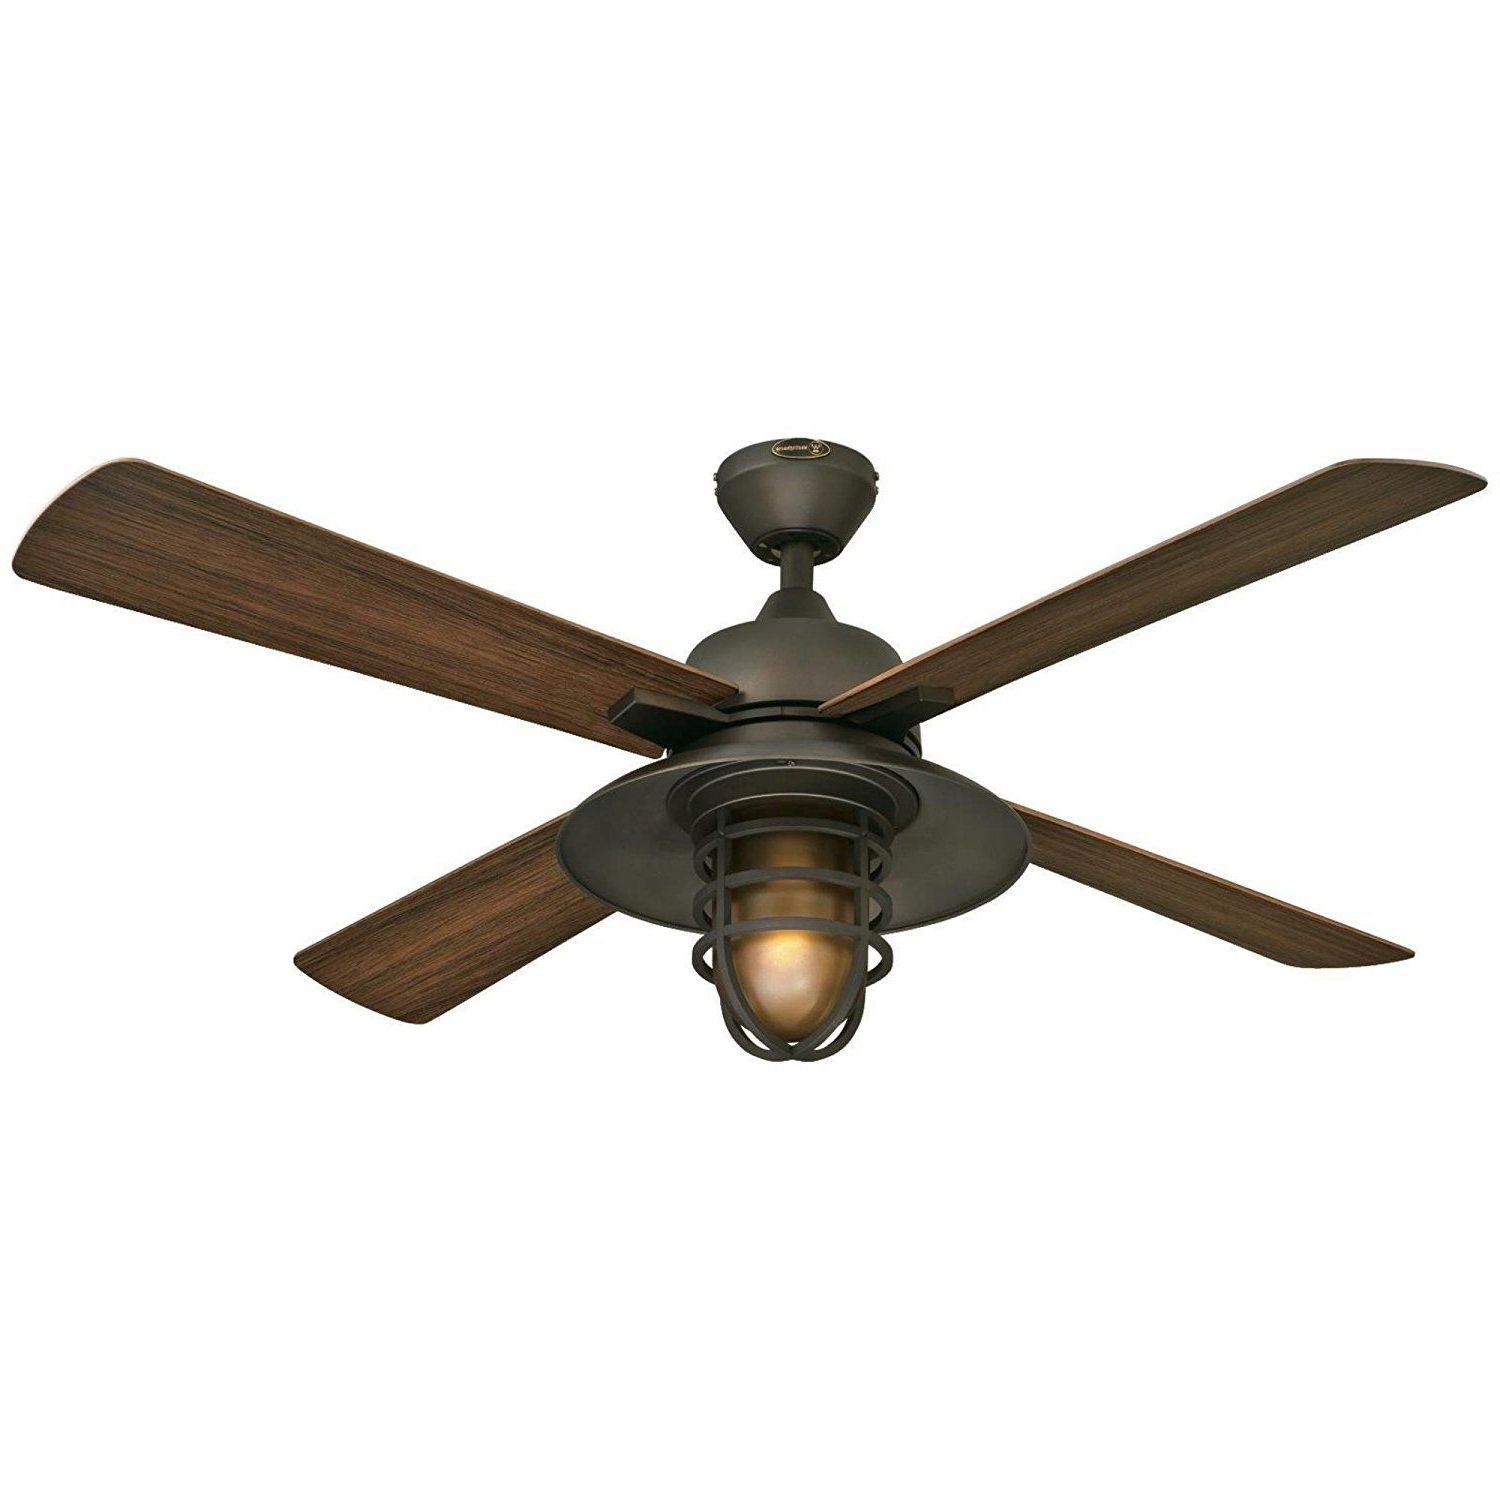 Ceiling Fan, Ceilings And Grey Ceiling Inside Widely Used Outdoor Ceiling Fans At Amazon (View 2 of 21)